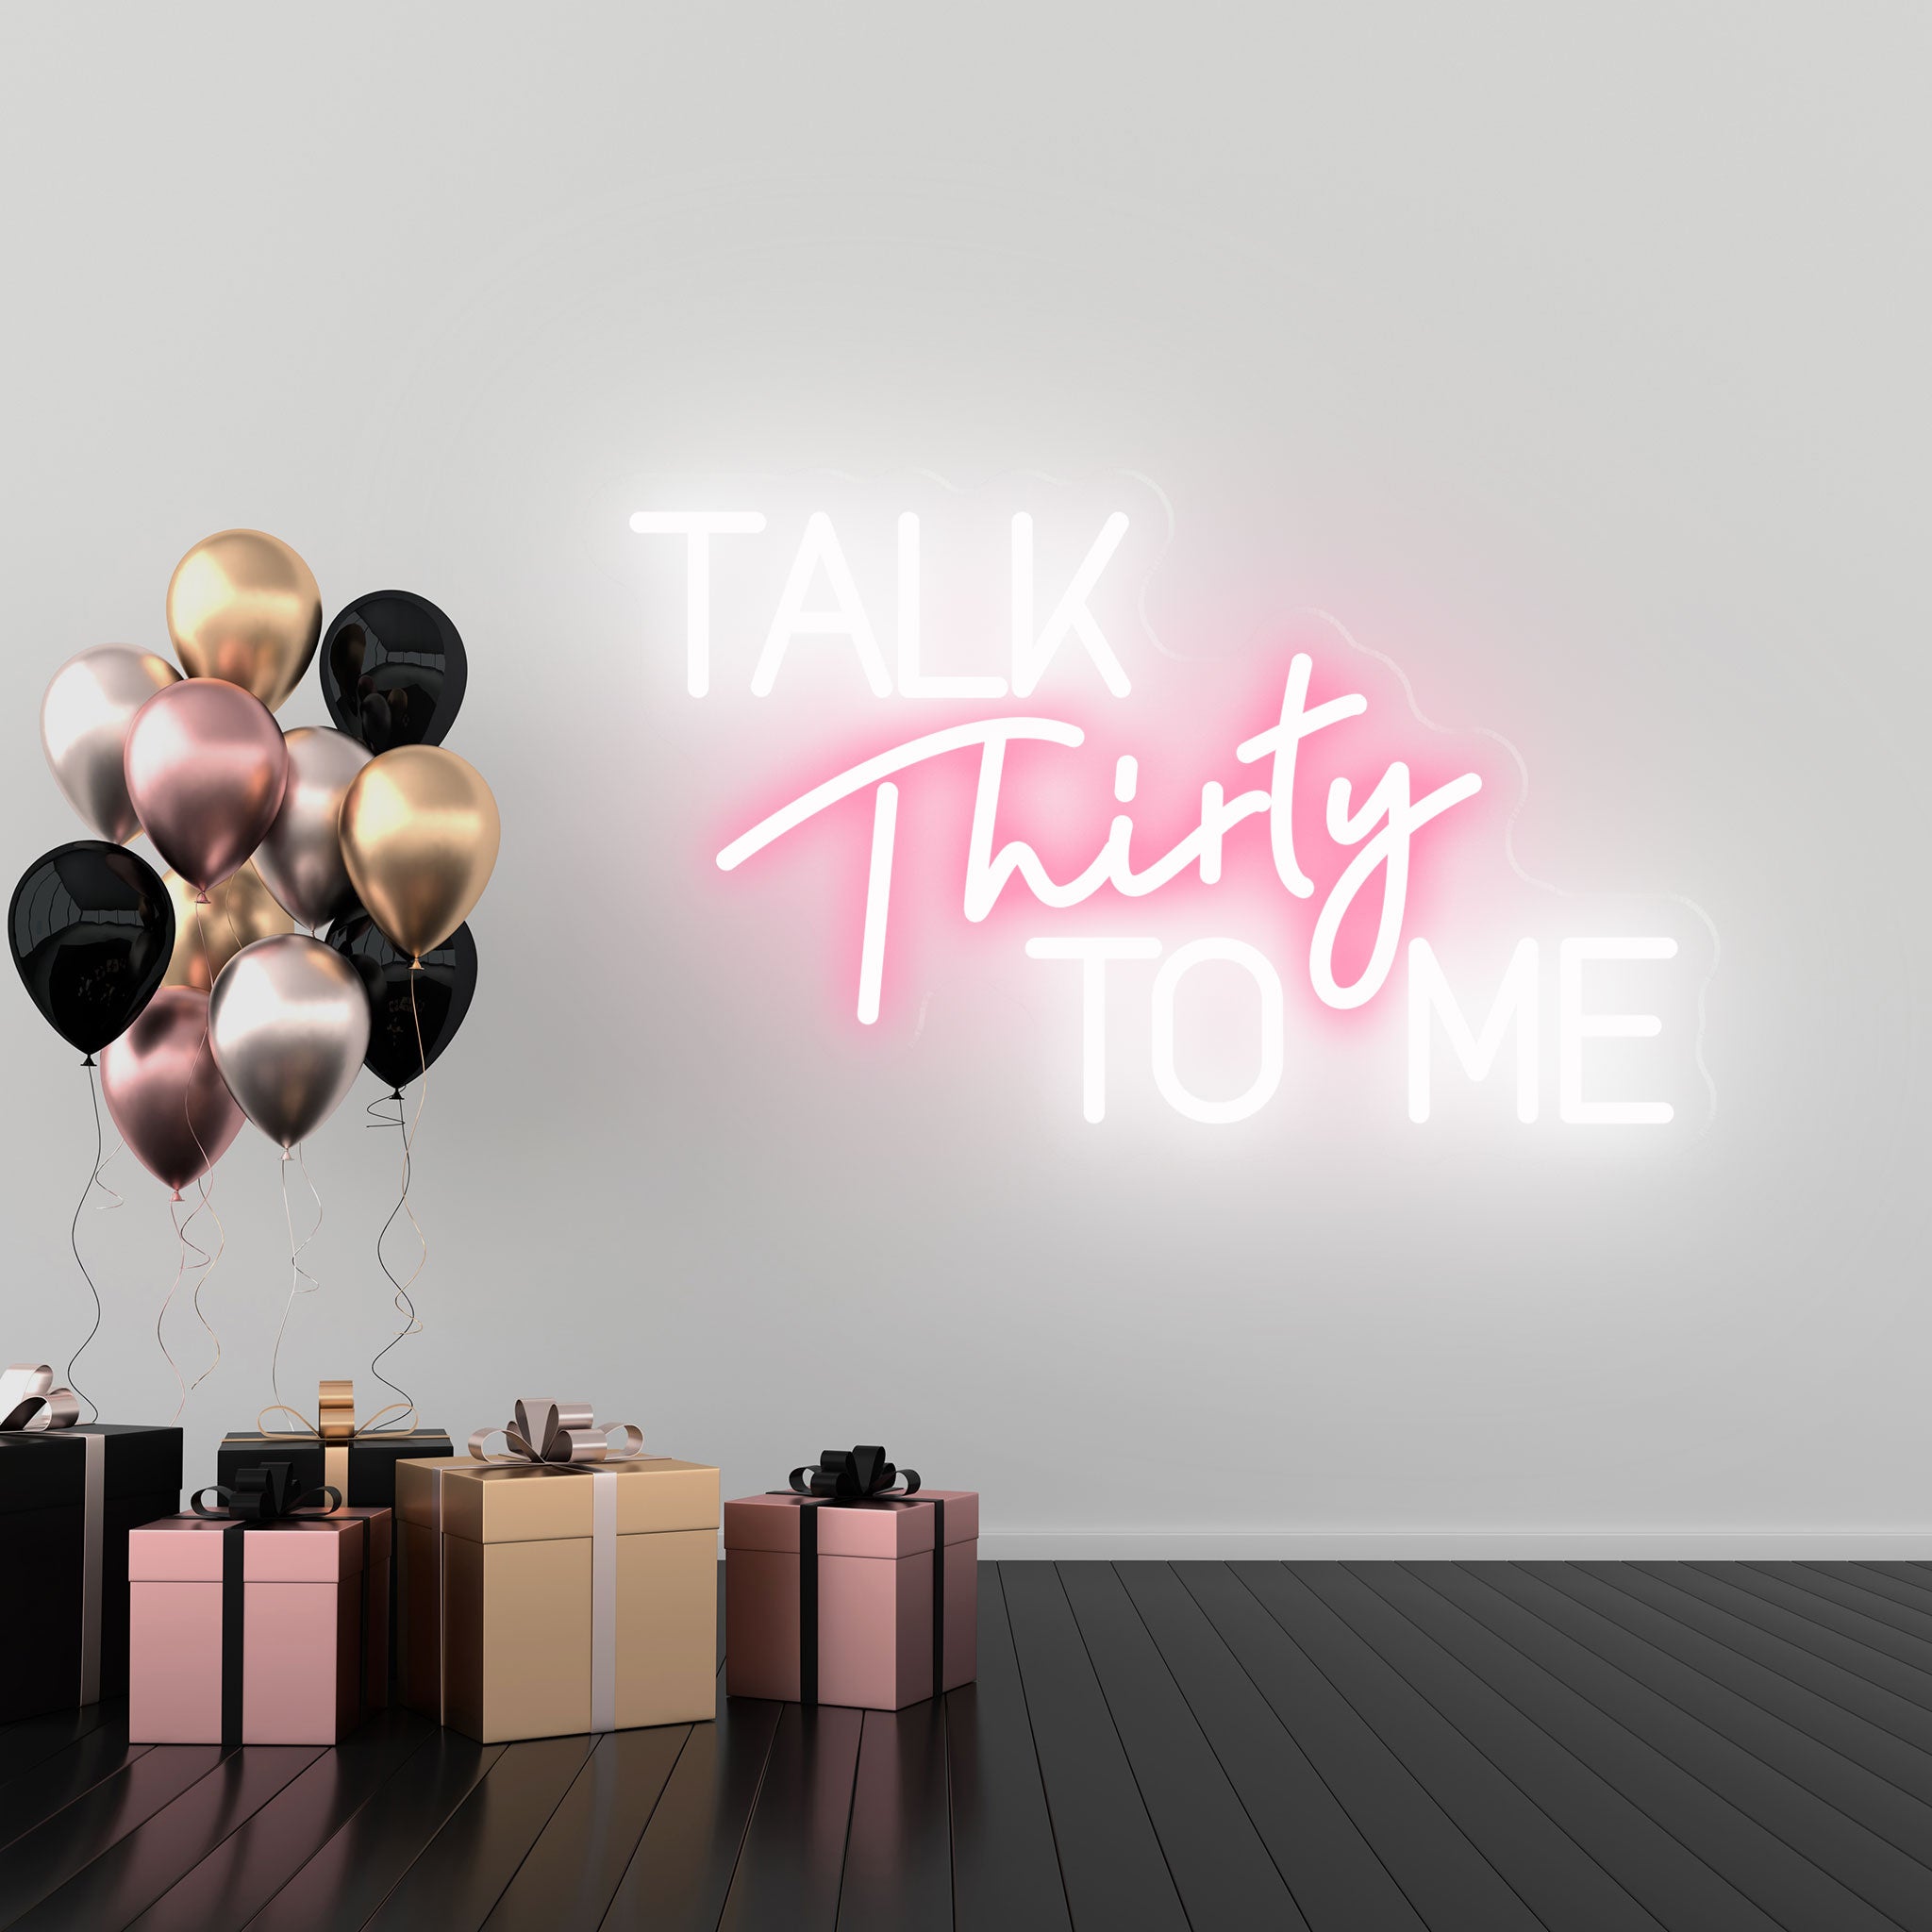 Talk Thirty to me - Neon Sign - Birthday Party